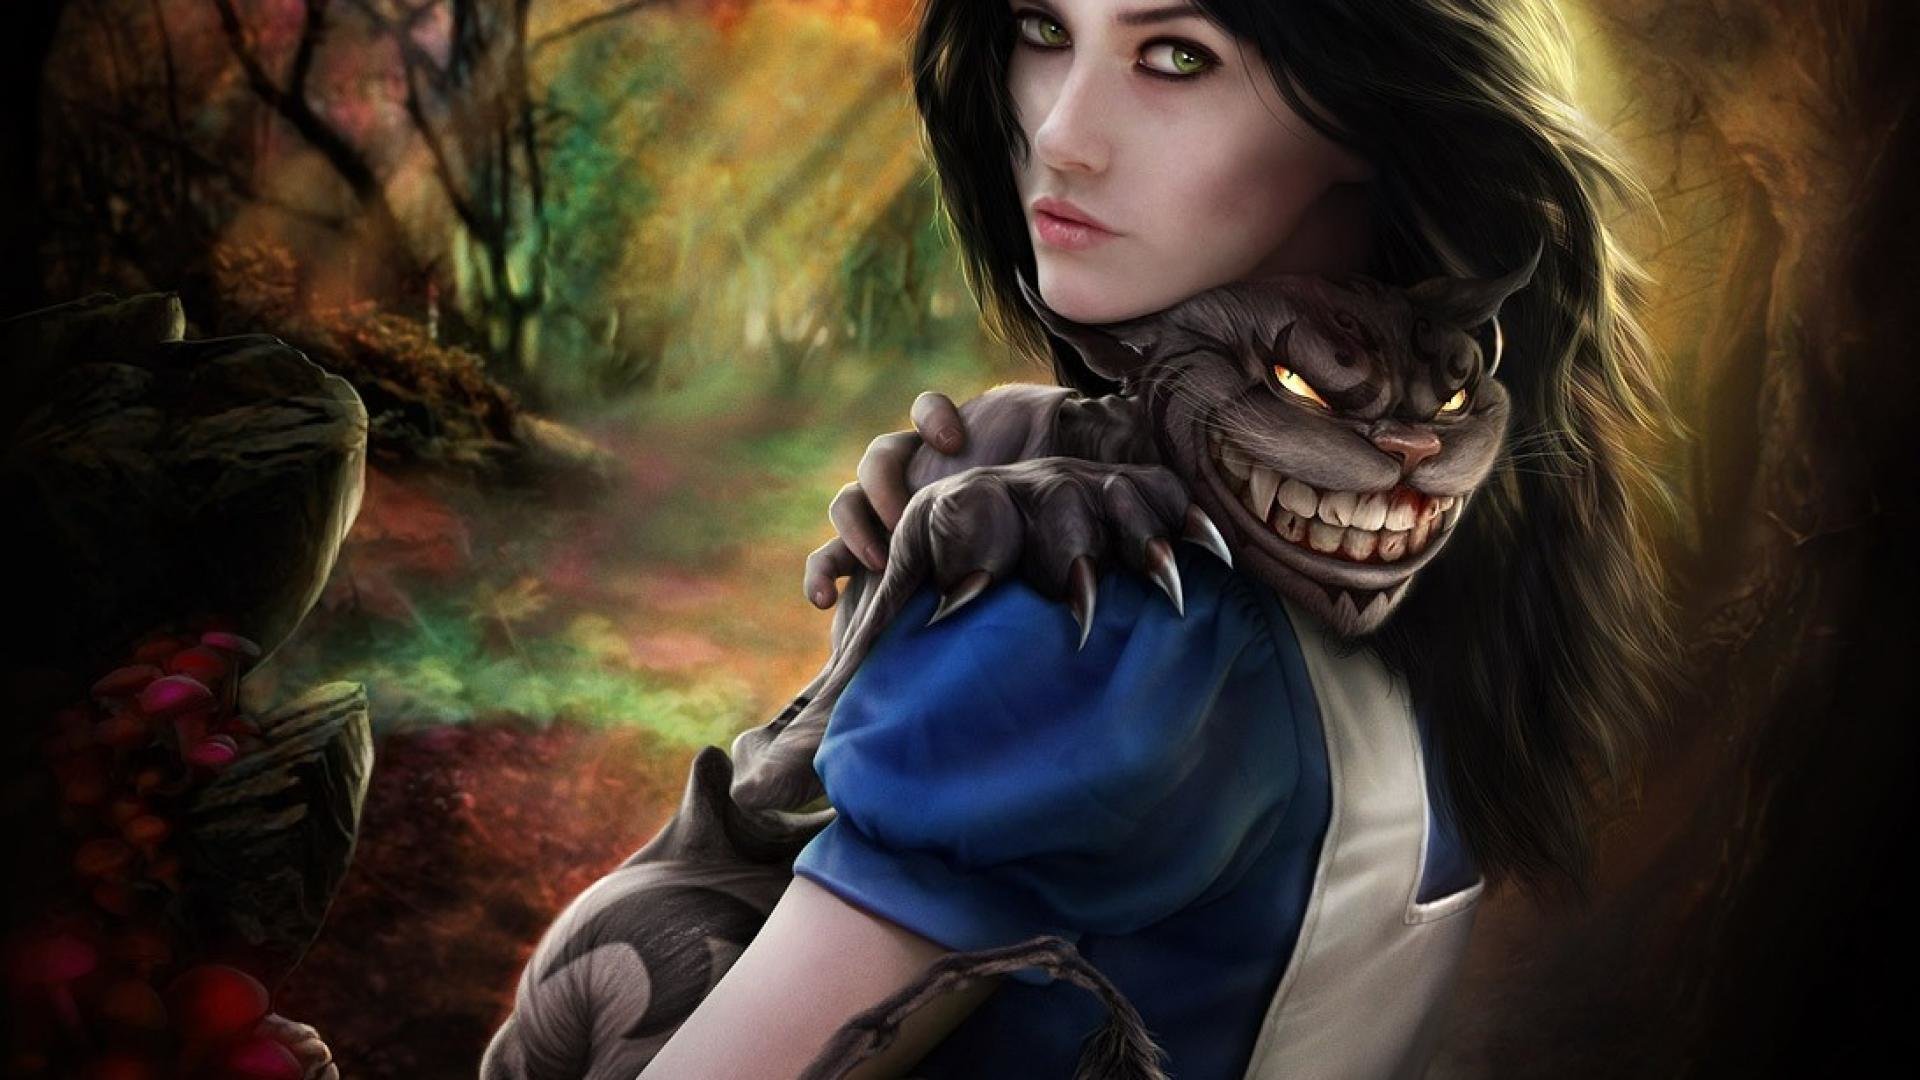 Awesome American Mcgee's Alice free wallpaper ID:276068 for hd 1920x1080 desktop